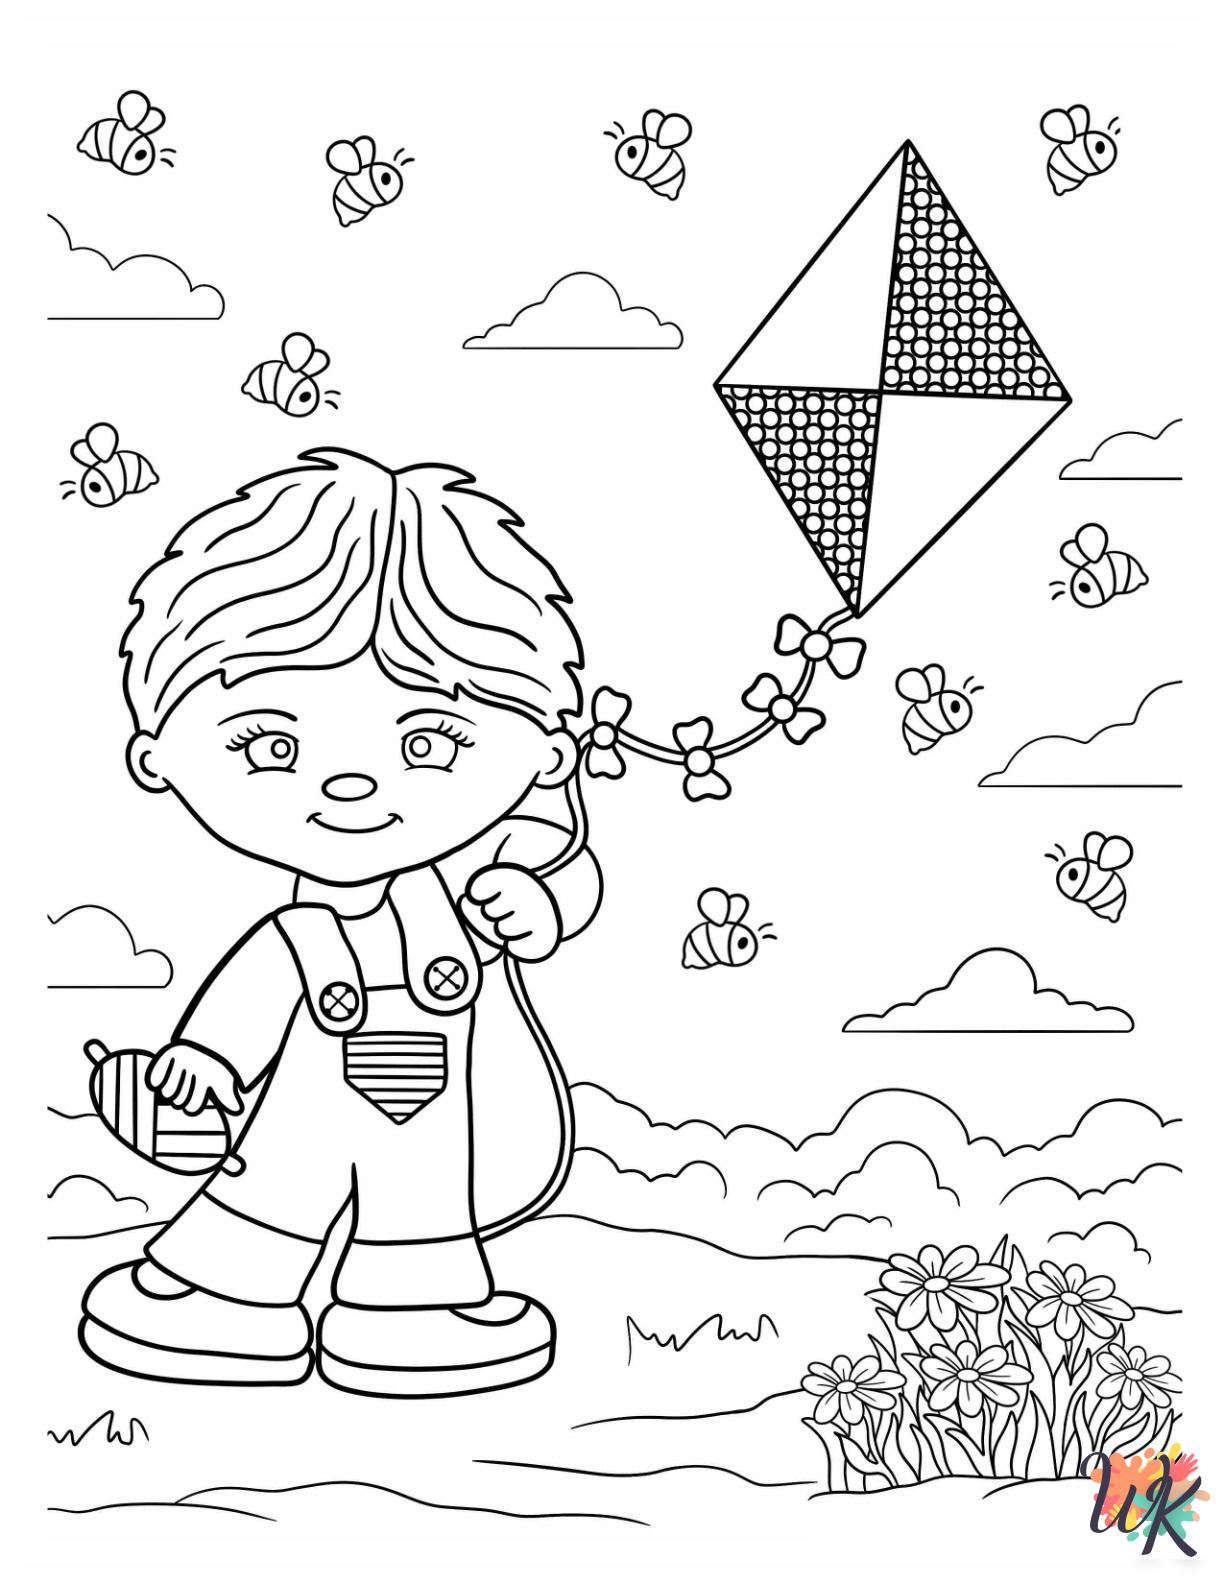 Kite Coloring Pages 3